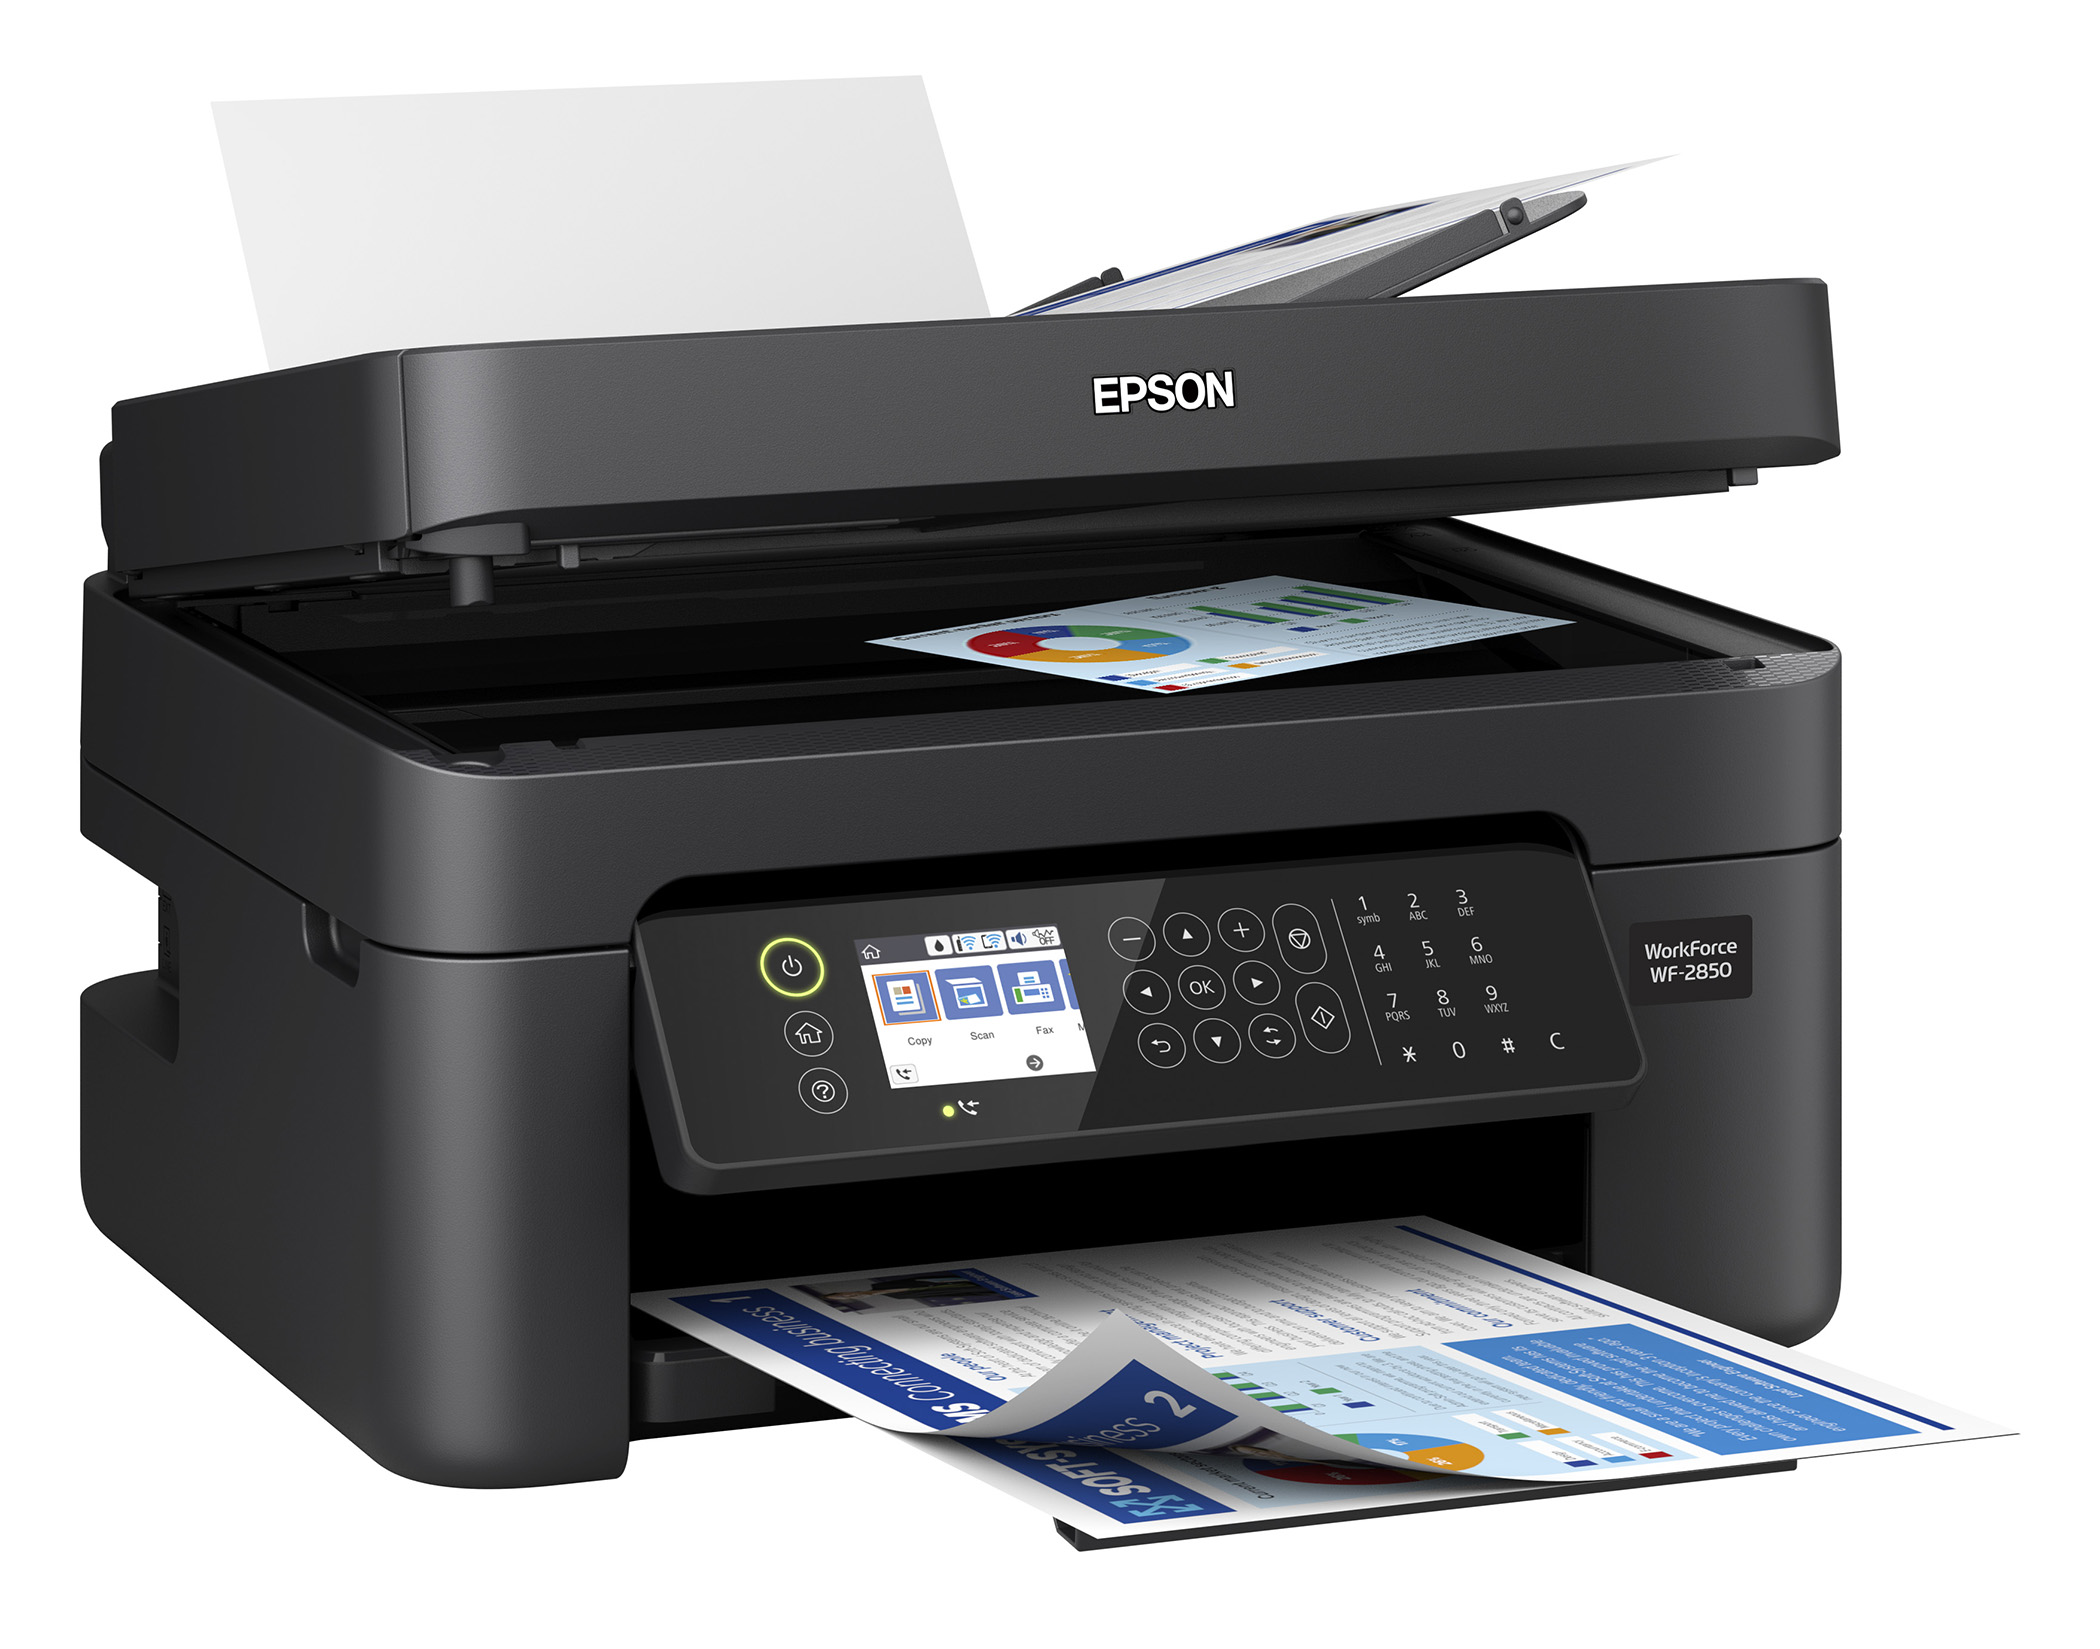 Epson WorkForce WF-2850 All-in-One Wireless Color Printer with Scanner, Copier and Fax - image 3 of 7